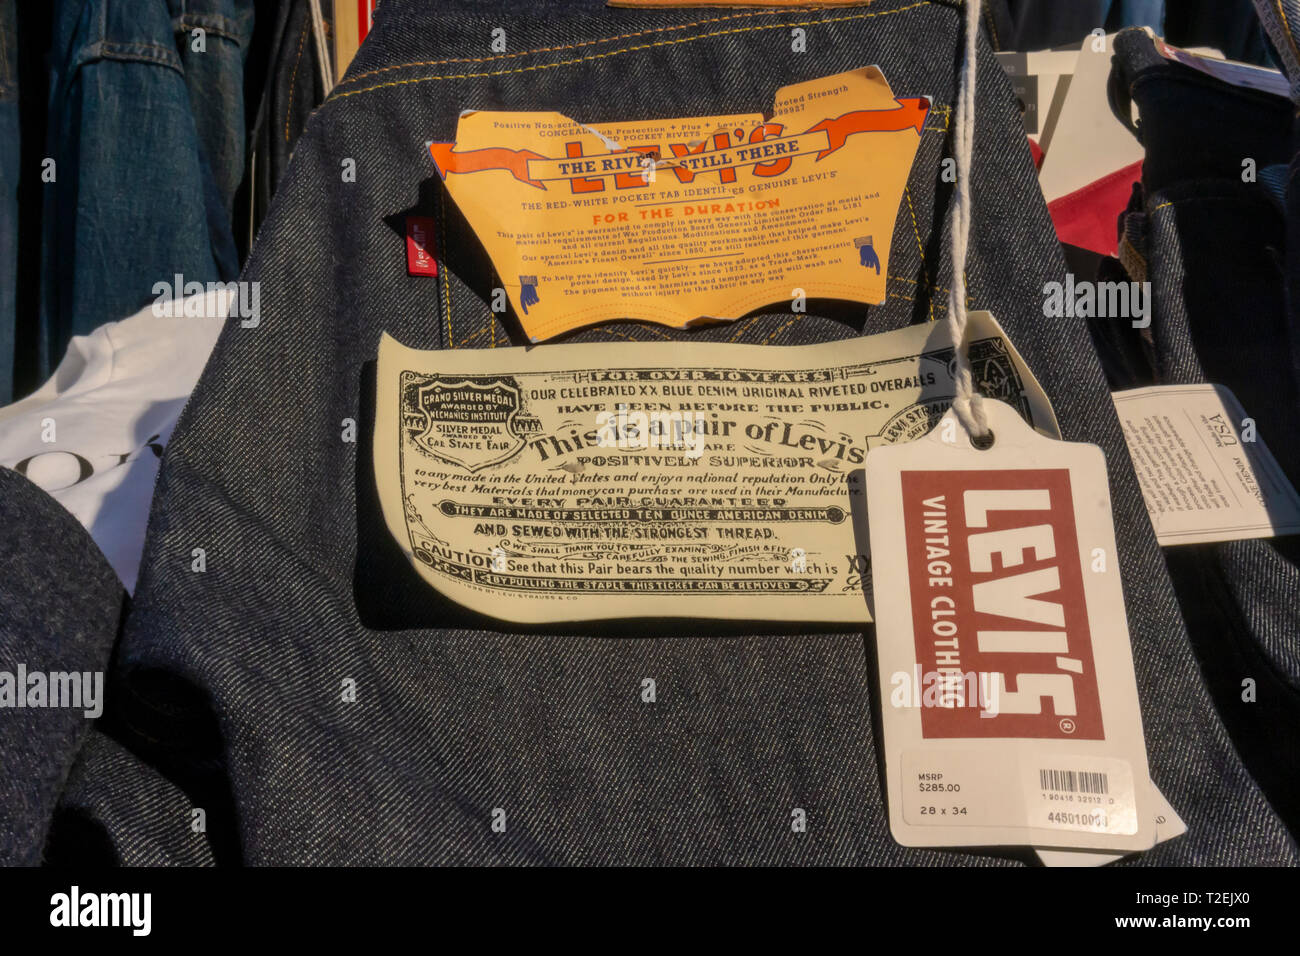 Vintage Levis Jeans High Resolution Stock Photography and Images - Alamy